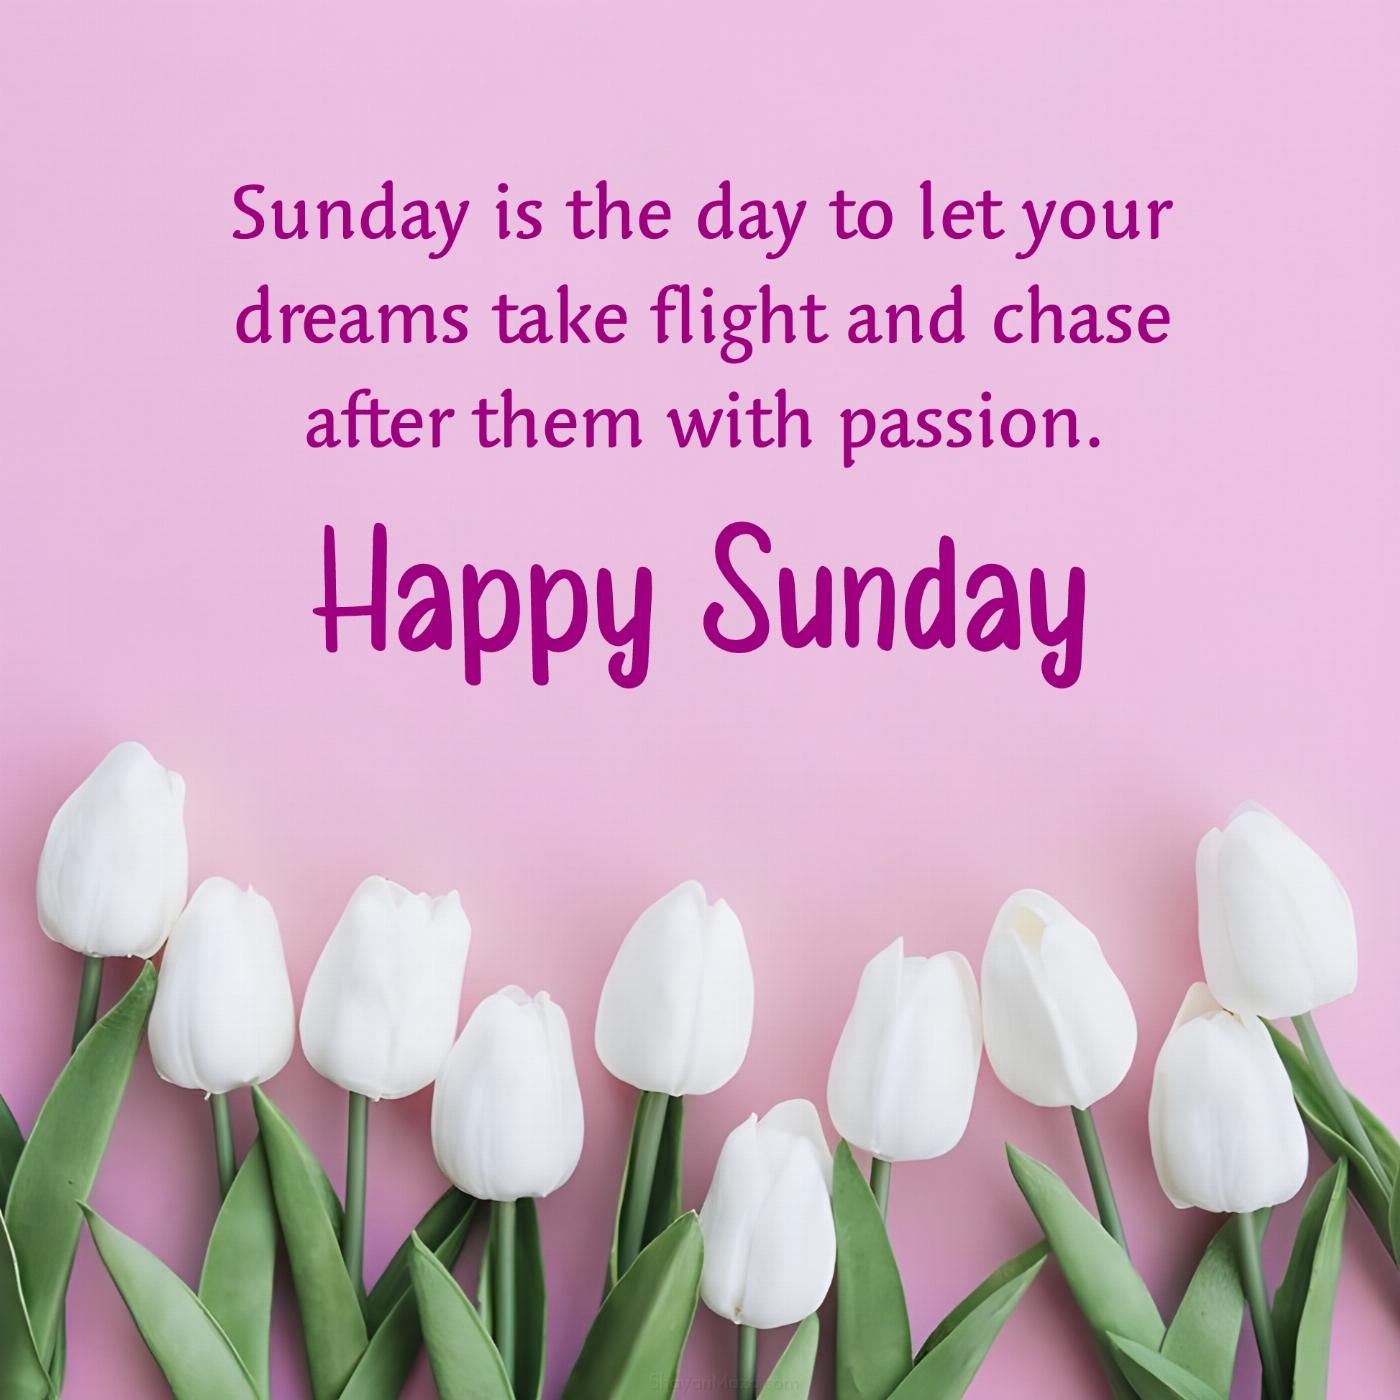 Sunday is the day to let your dreams take flight